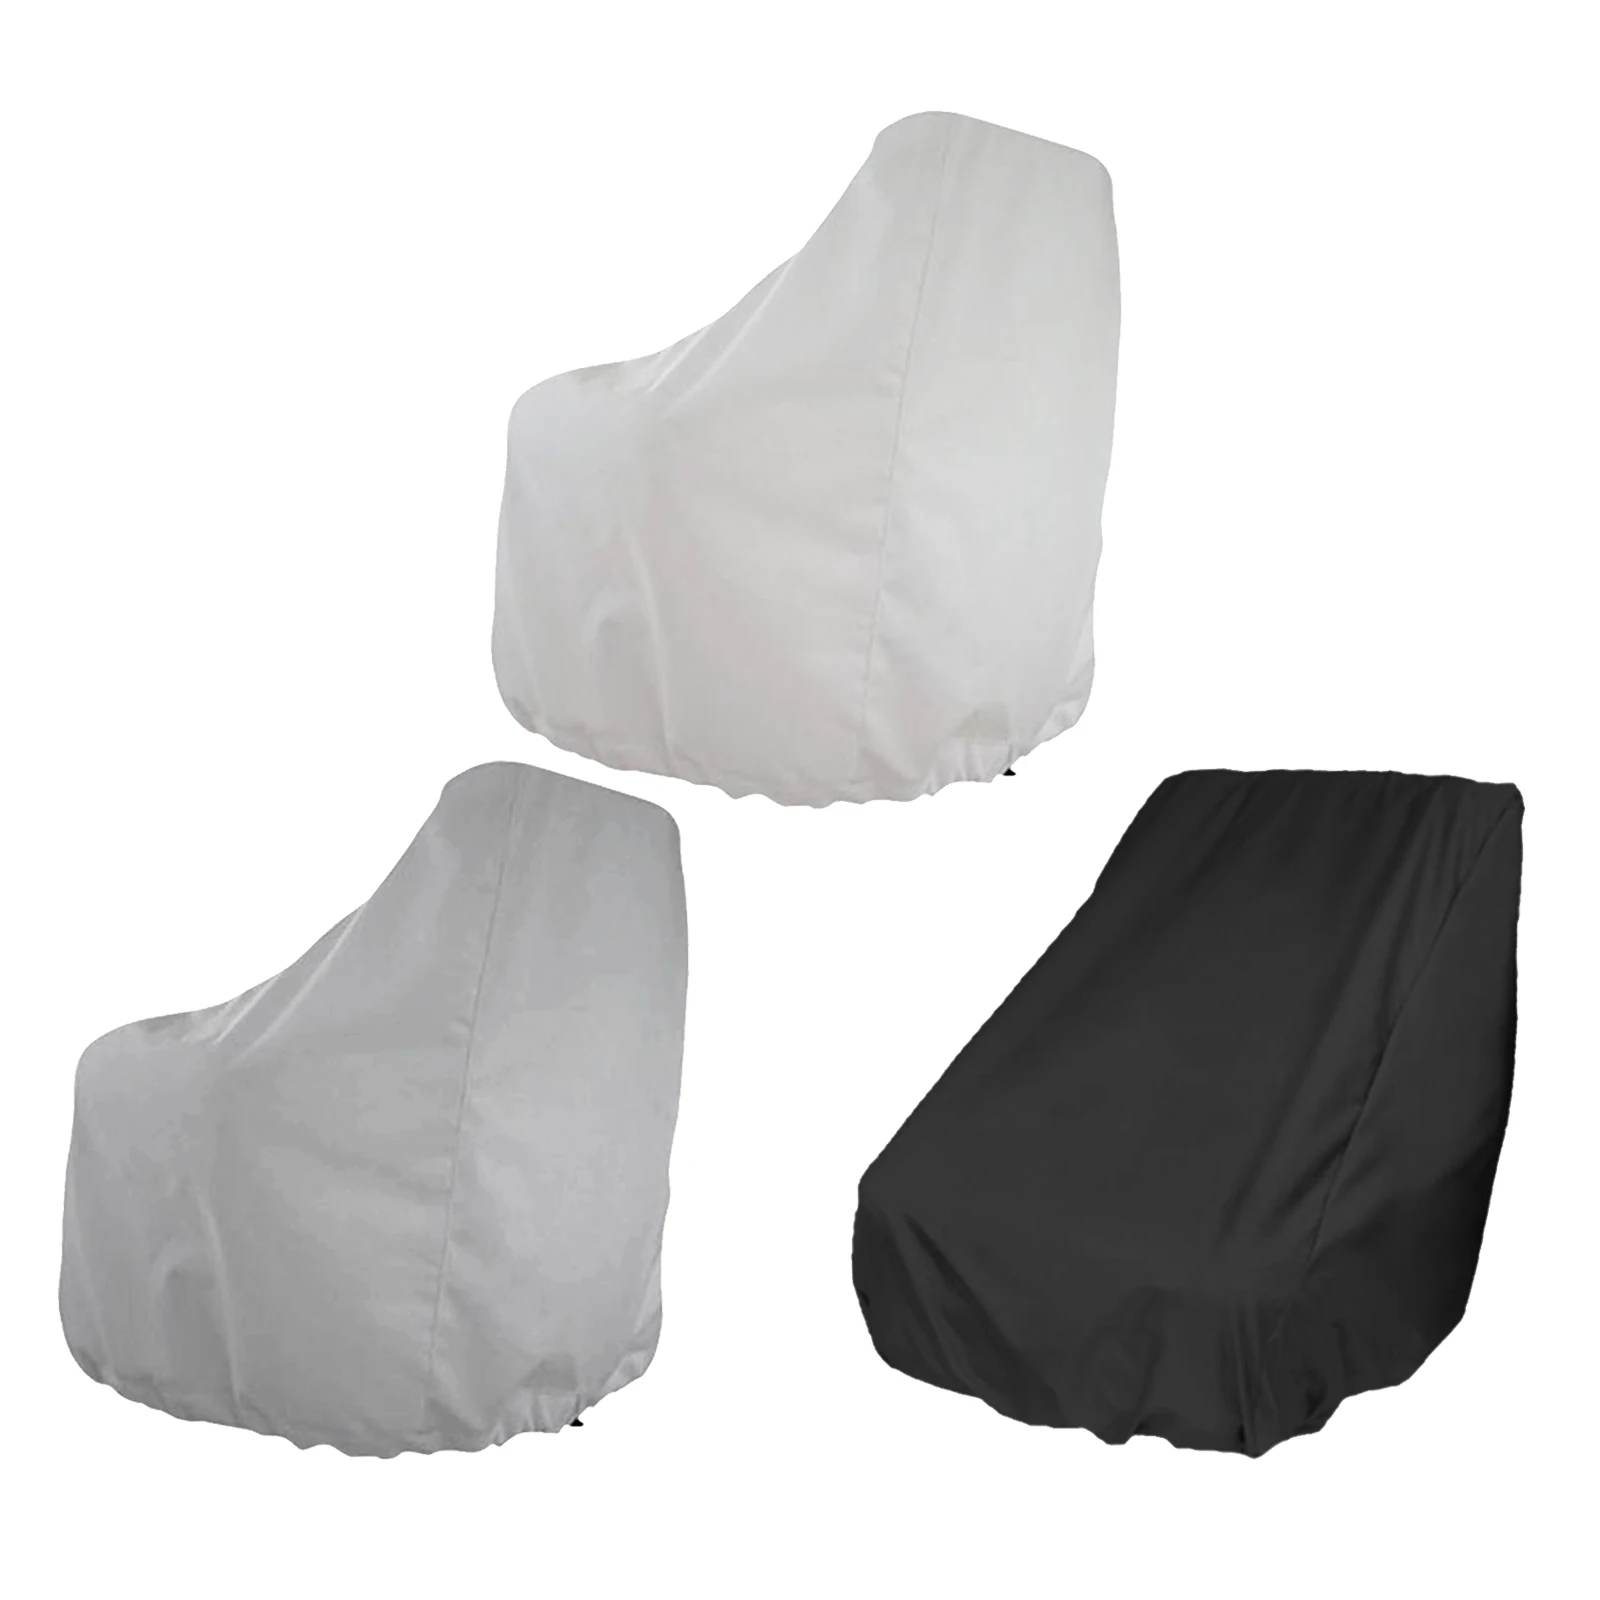 Boat Seat Cover, PVC Water Resistant, UV Resistant, Fishing Boat Accessories, Oxford Cloth, 56x61x64cm